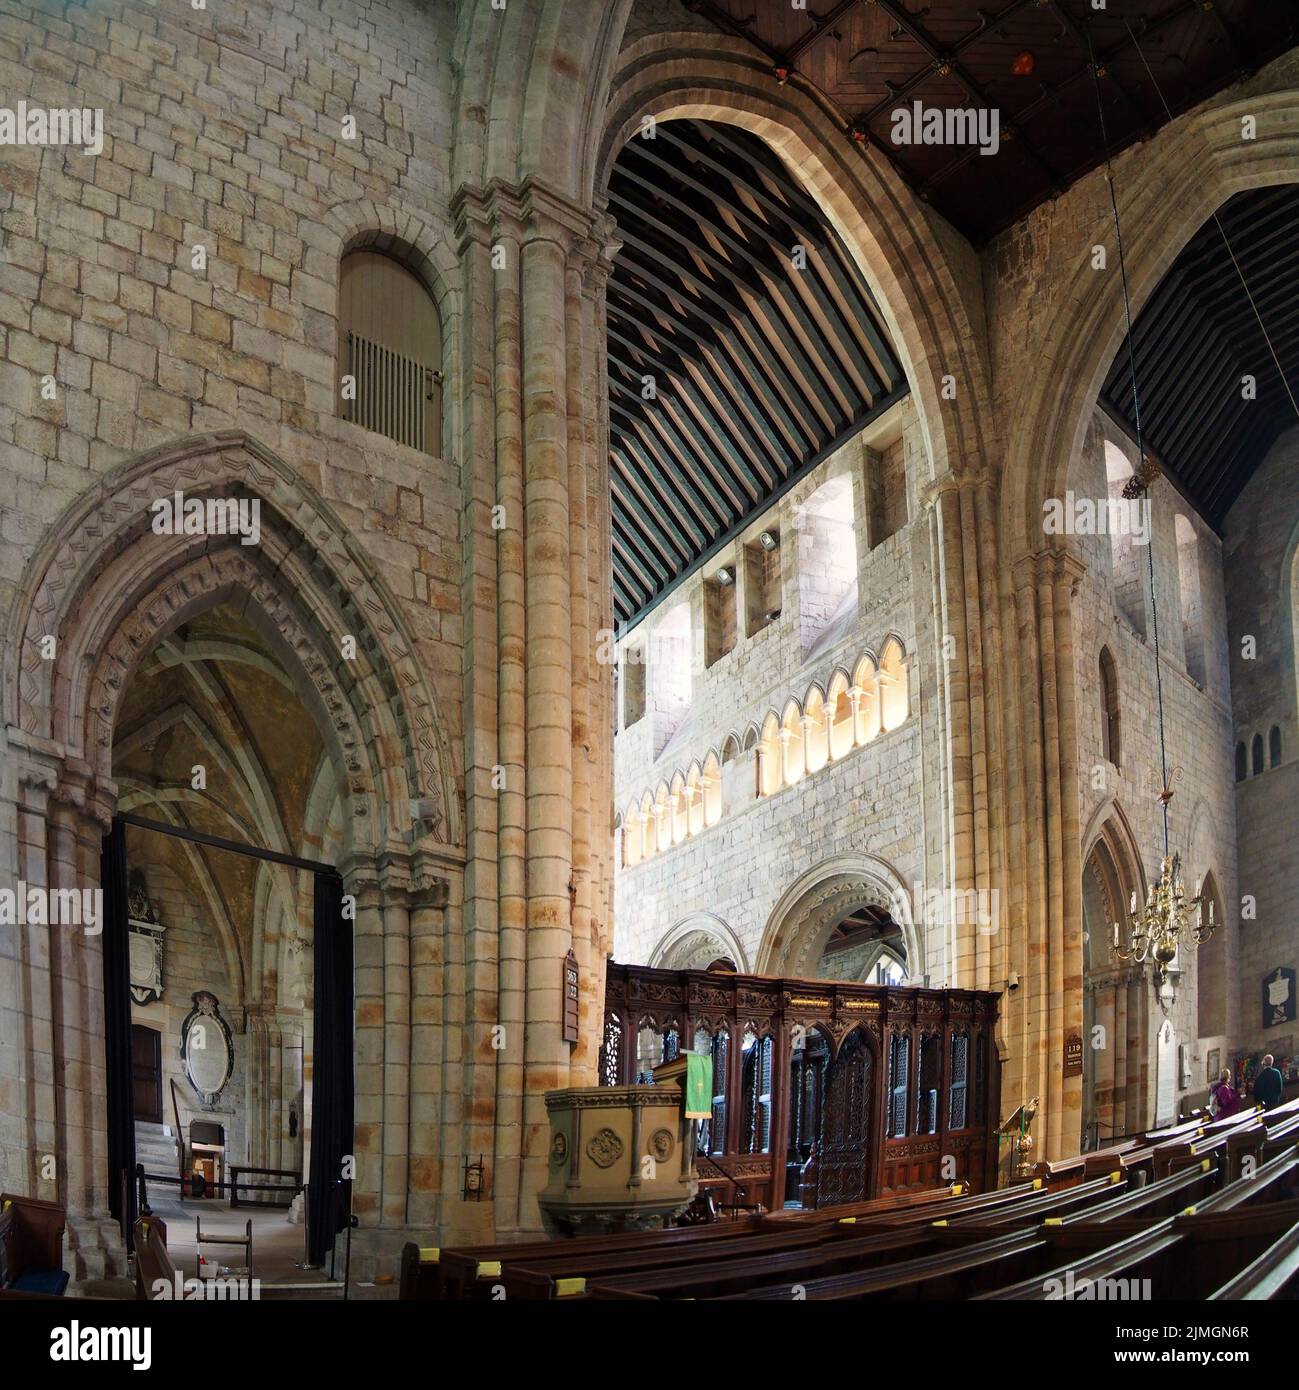 Interior of the historic medieval cartmel priory in cumbria now the parish church of st micheal and mary Stock Photo